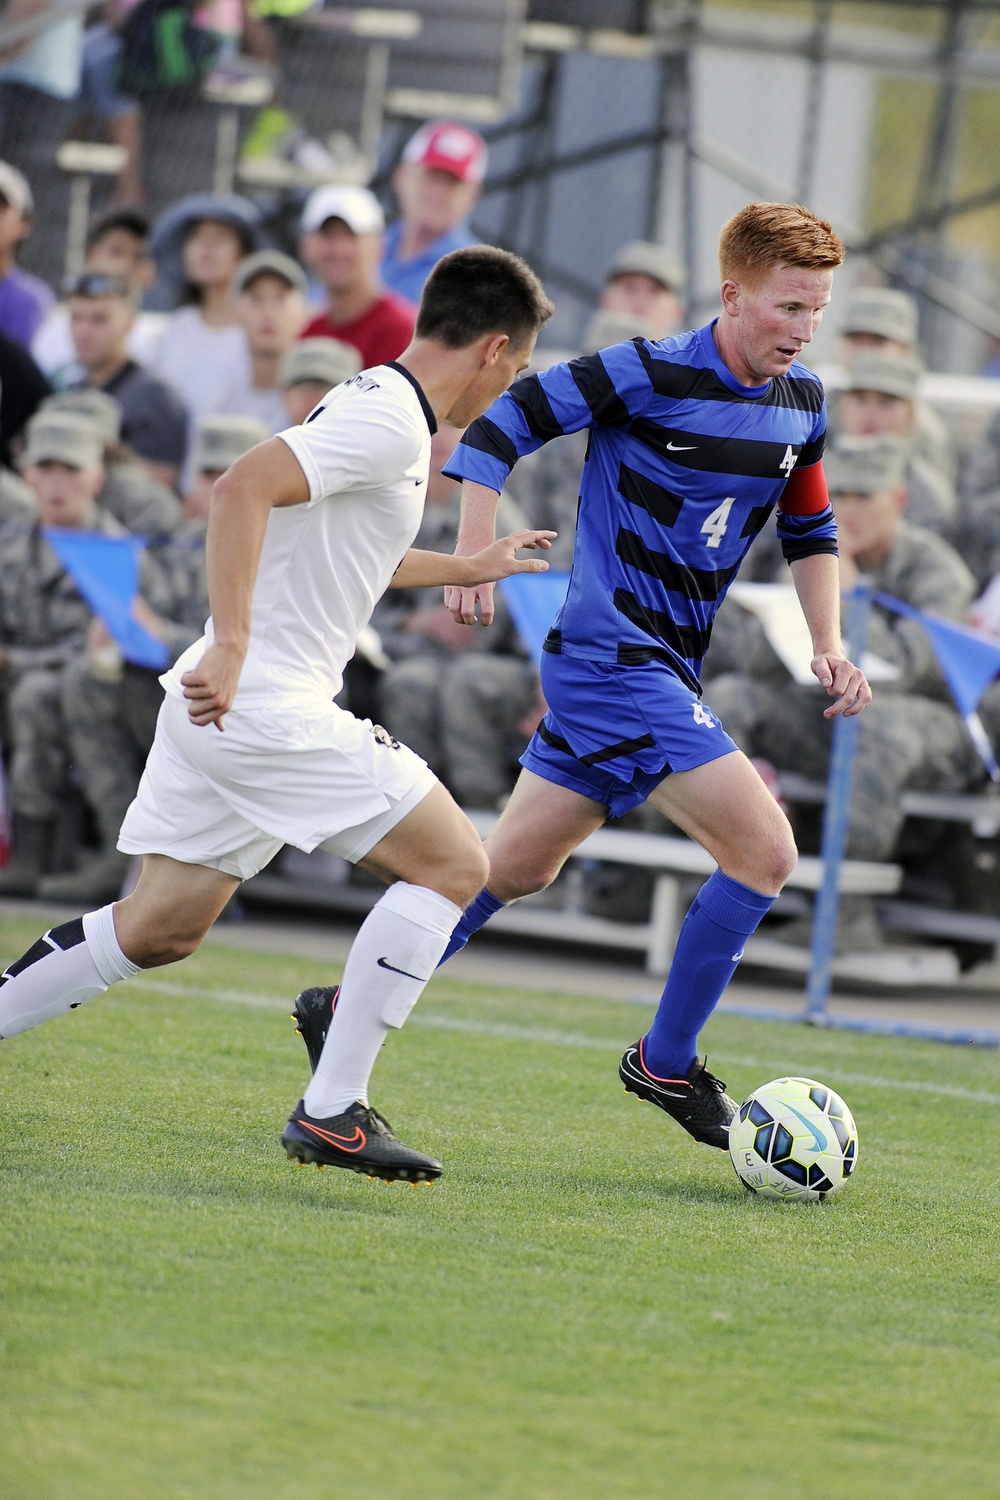 Air Force vs. Army Men's Soccer Aug 29, 2015